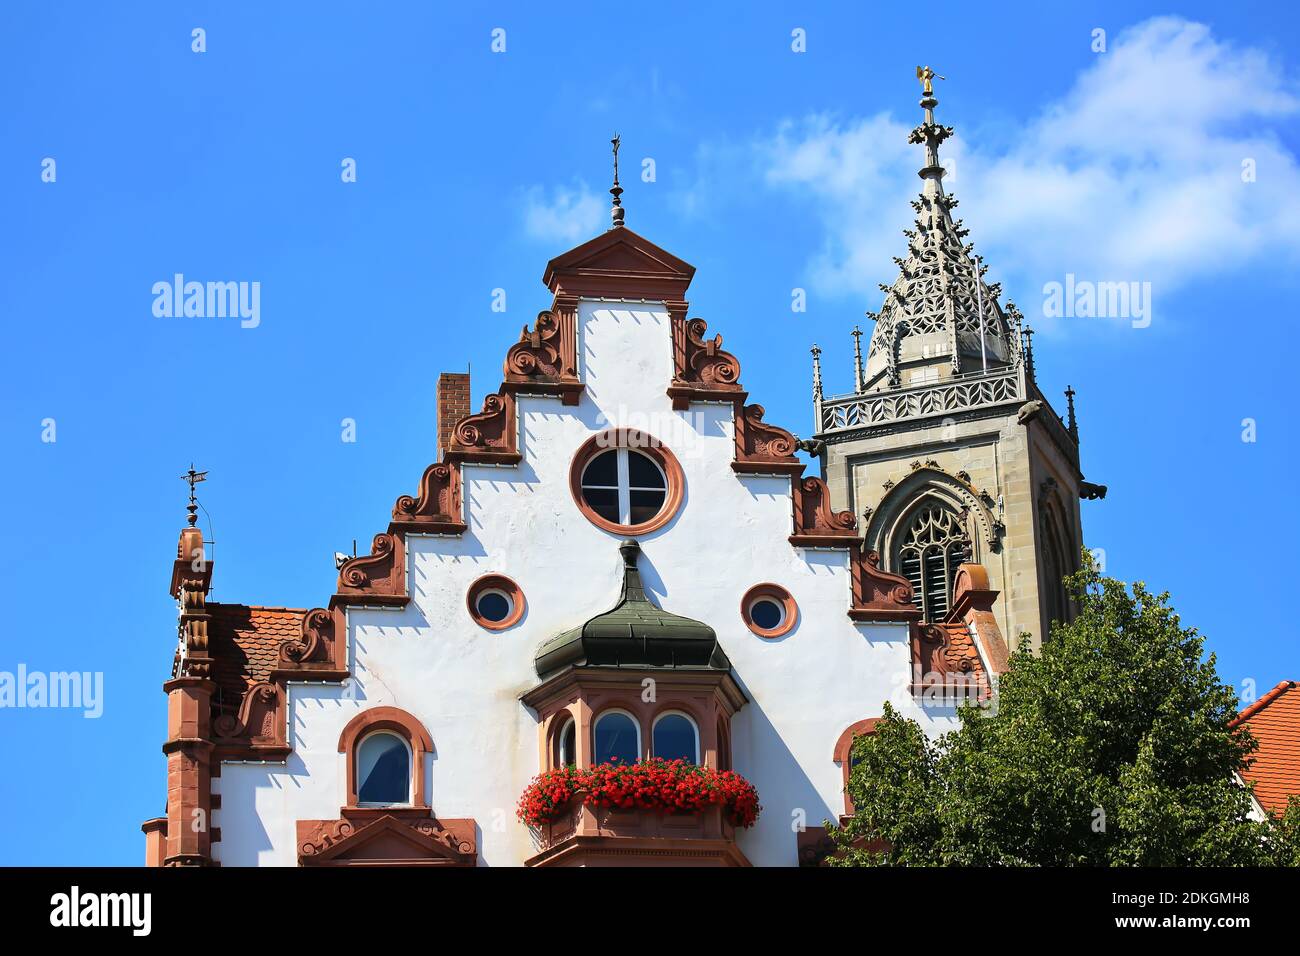 The town hall is a sight of the city of Pfullendorf Stock Photo